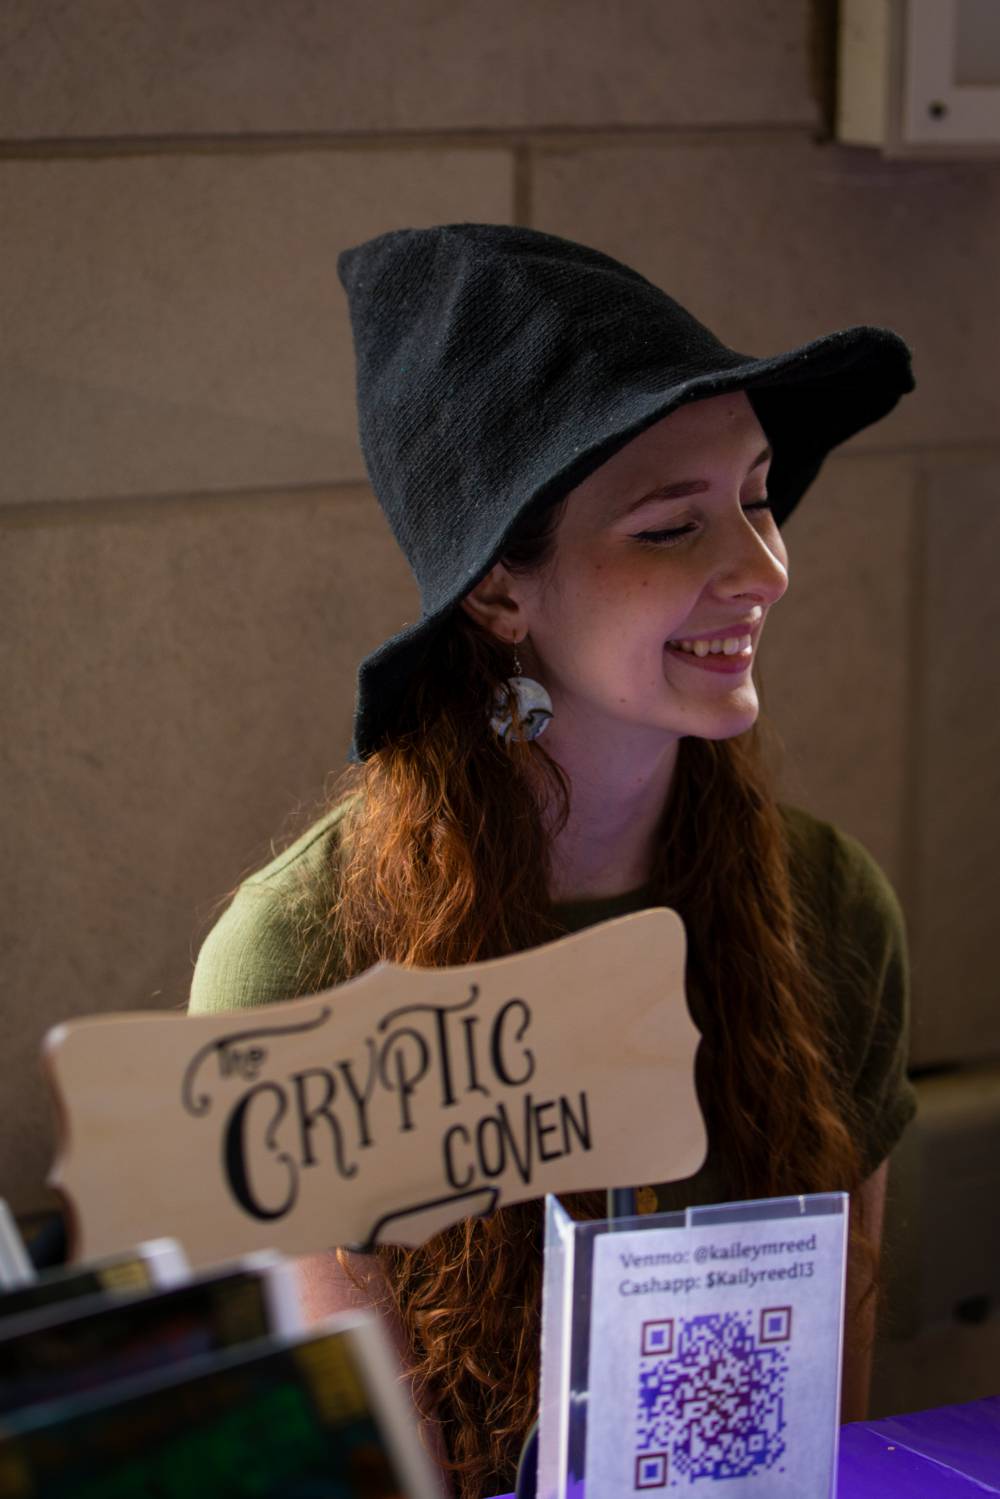 Student at The Cryptic Coven booth during Student Small Business Market.